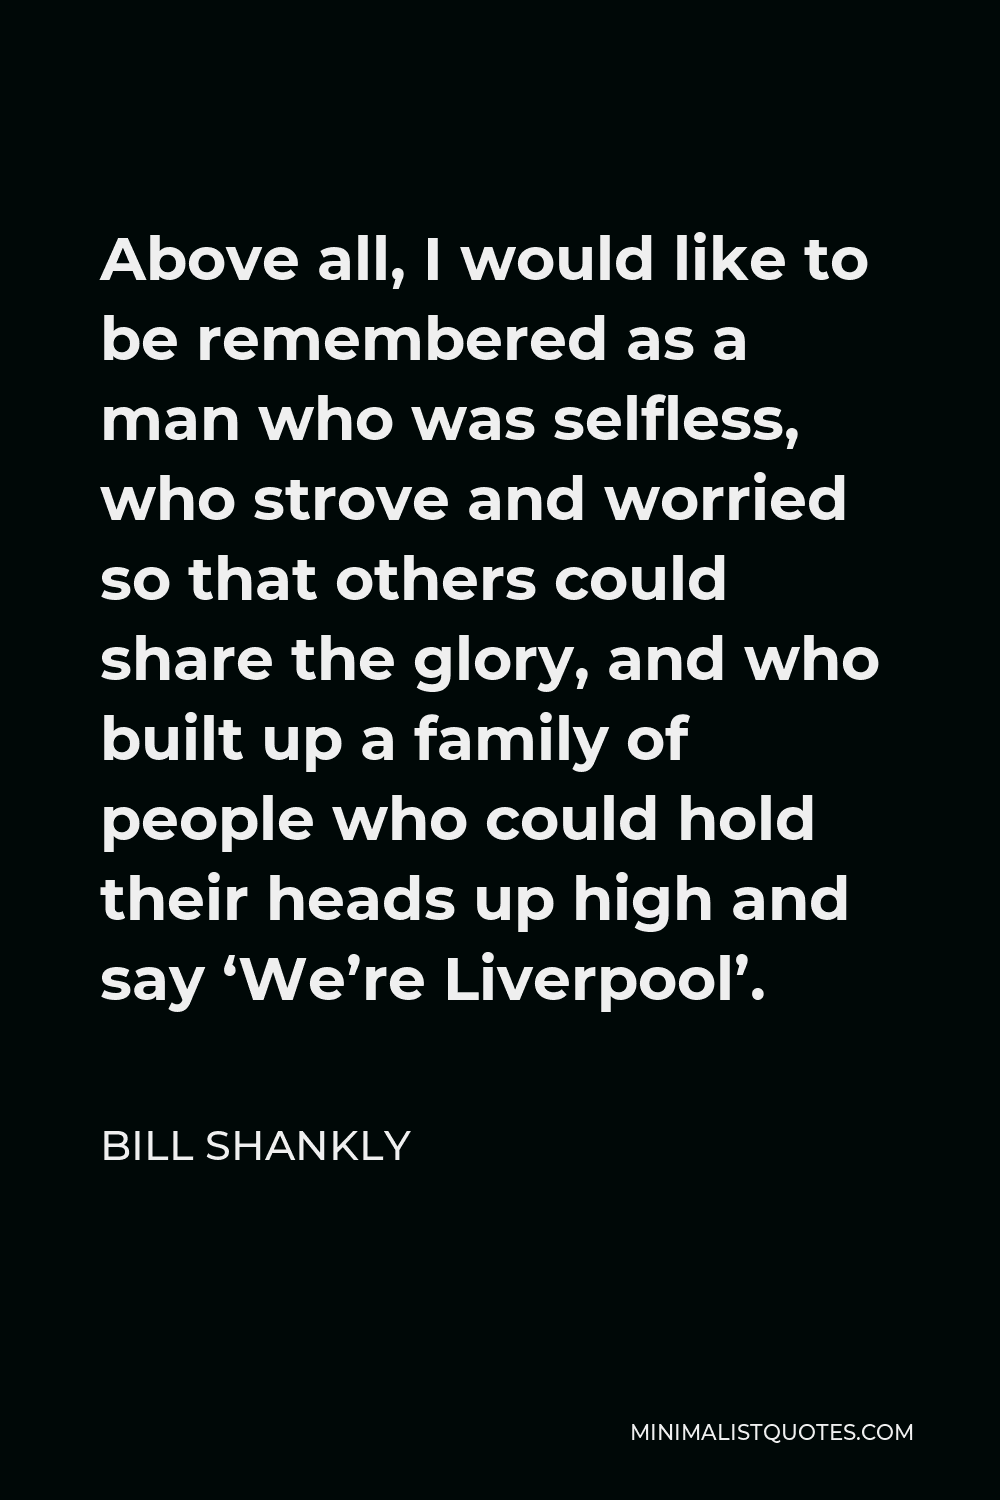 Bill Shankly Quote - Above all, I would like to be remembered as a man who was selfless, who strove and worried so that others could share the glory, and who built up a family of people who could hold their heads up high and say ‘We’re Liverpool’.